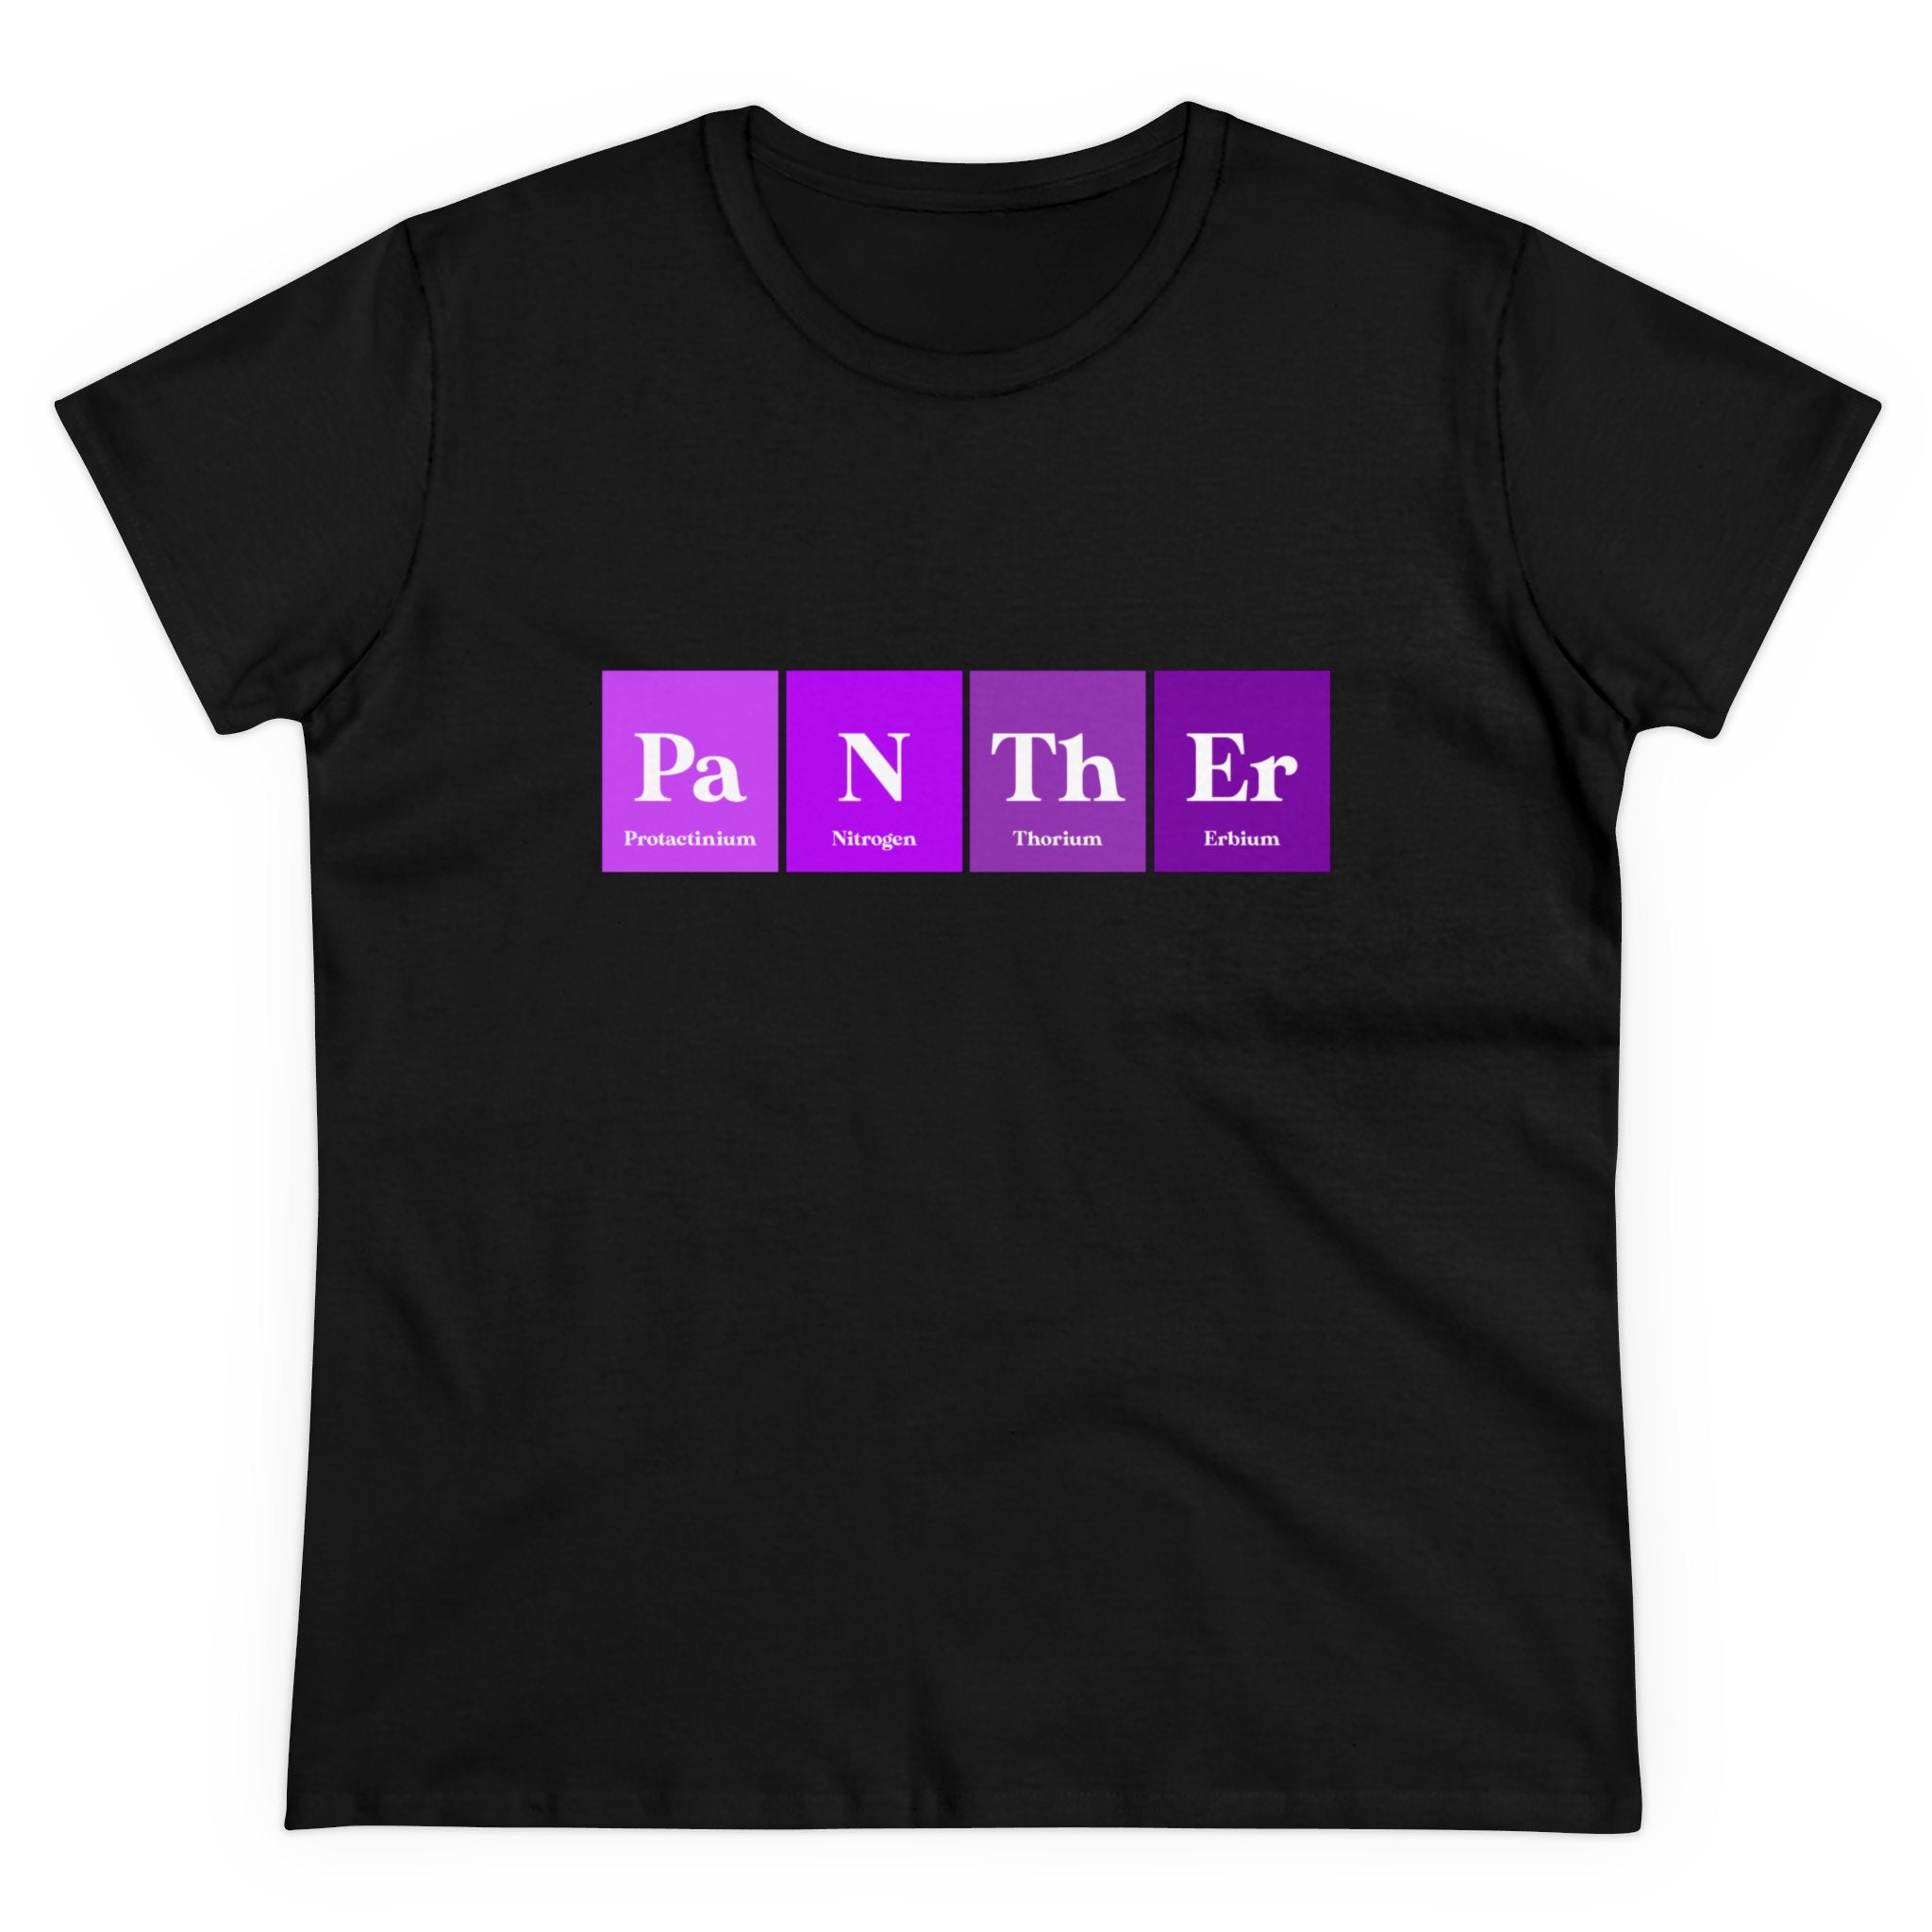 Pa-N-Th-Er - Women's Tee: Black T-shirt featuring the word "Panther" spelled out using symbols from the periodic table: Protactinium (Pa), Nitrogen (N), Thorium (Th), and Erbium (Er). This cotton Women's Tee combines Pa-N-Th-Er designs with ultimate comfort.